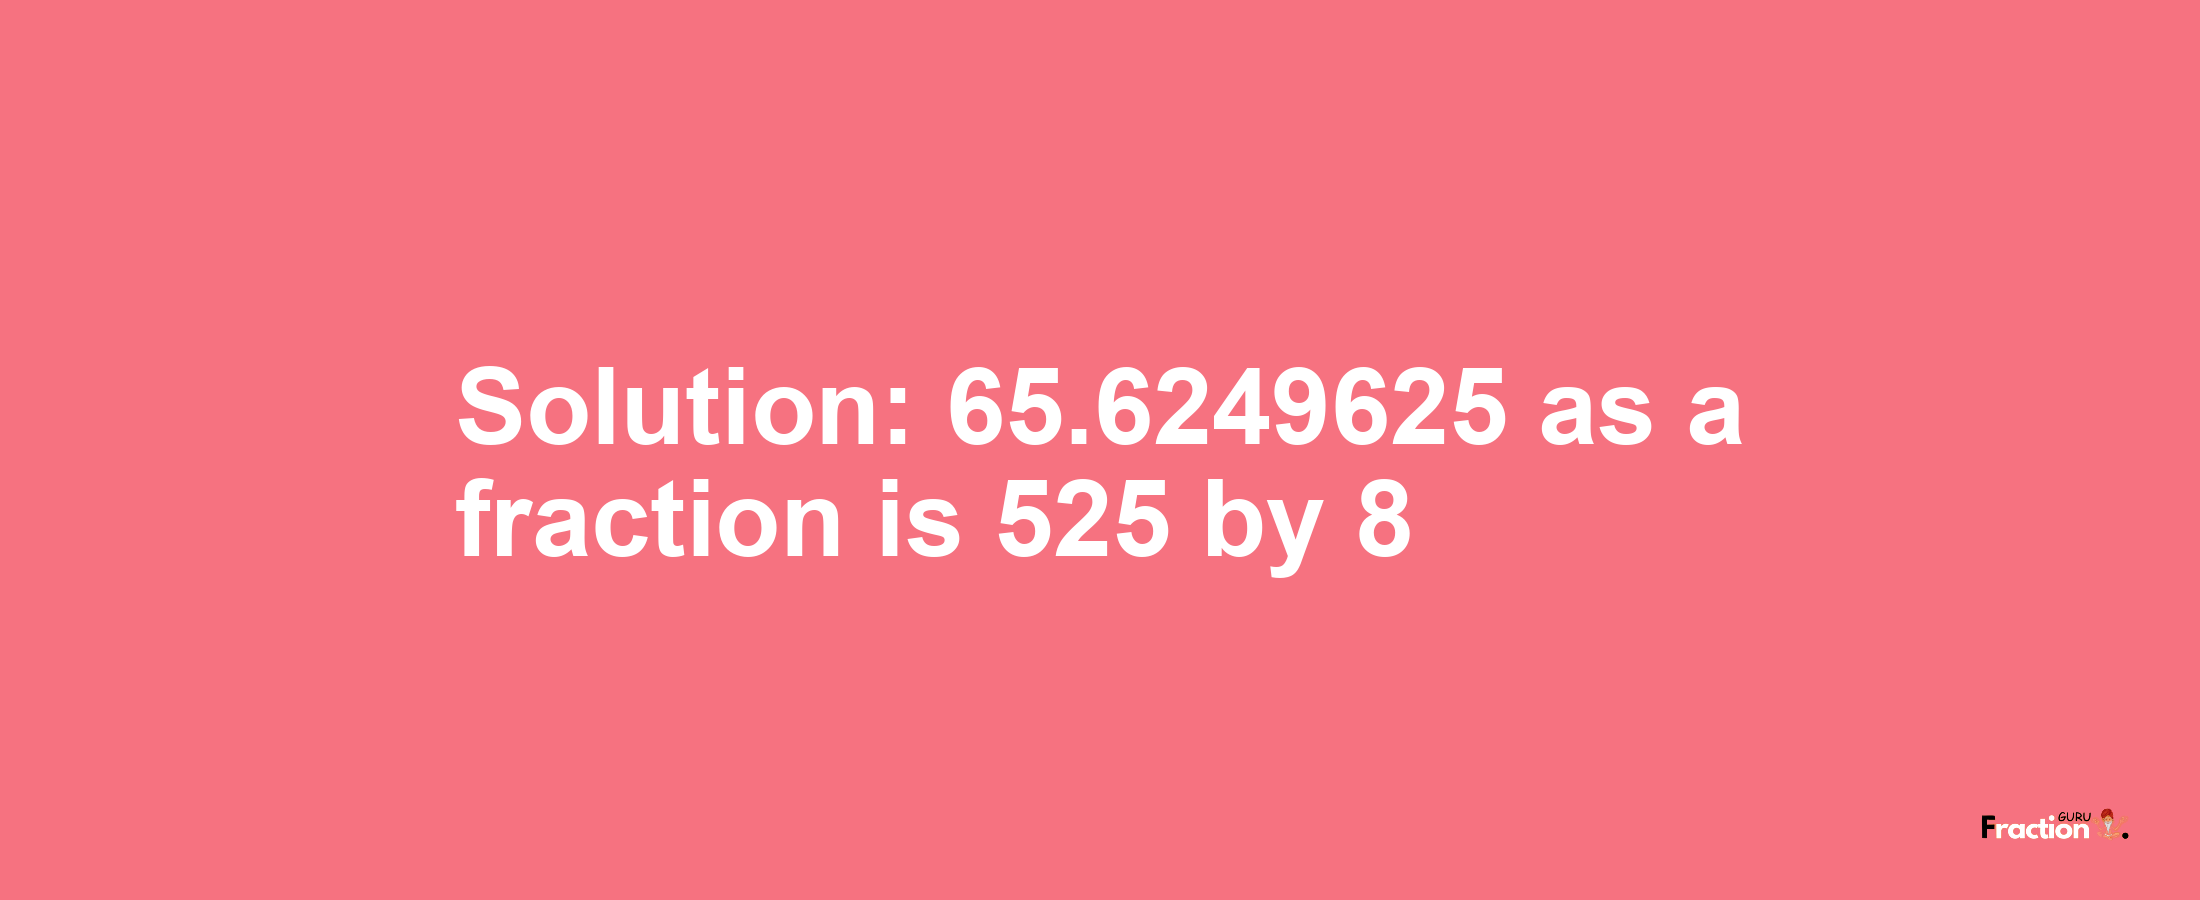 Solution:65.6249625 as a fraction is 525/8